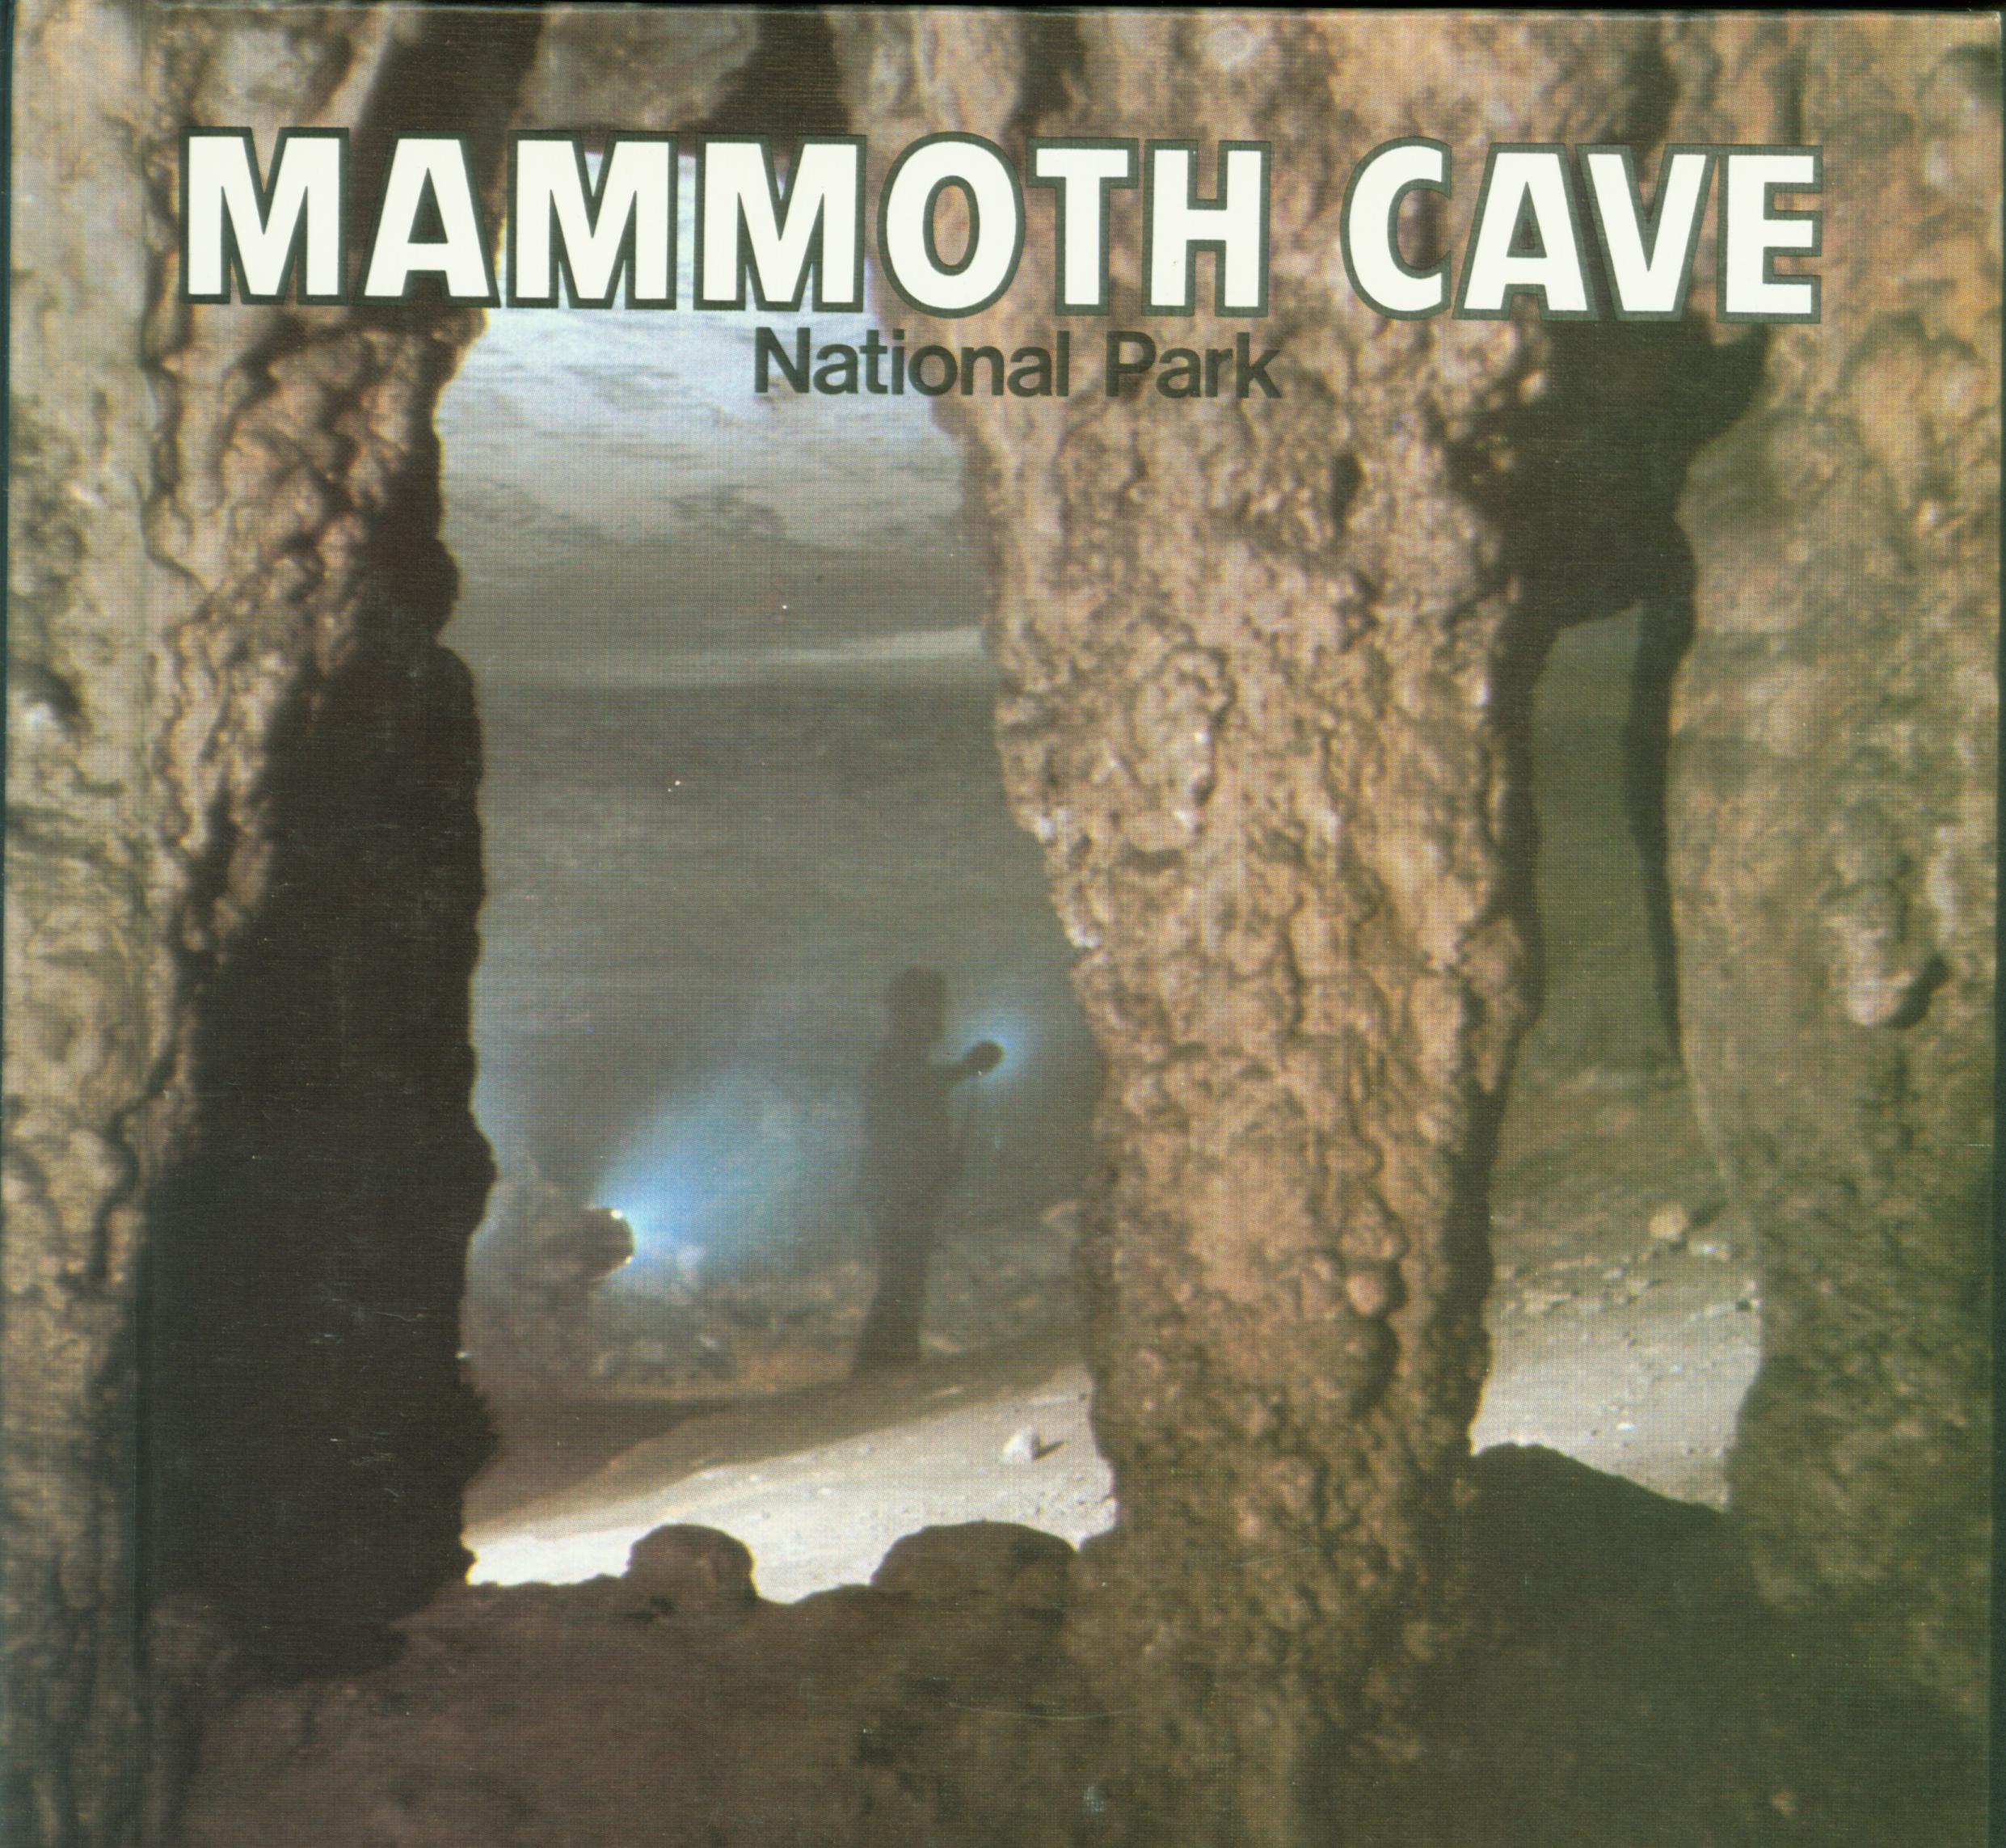 MAMMOTH CAVE NATIONAL PARK.